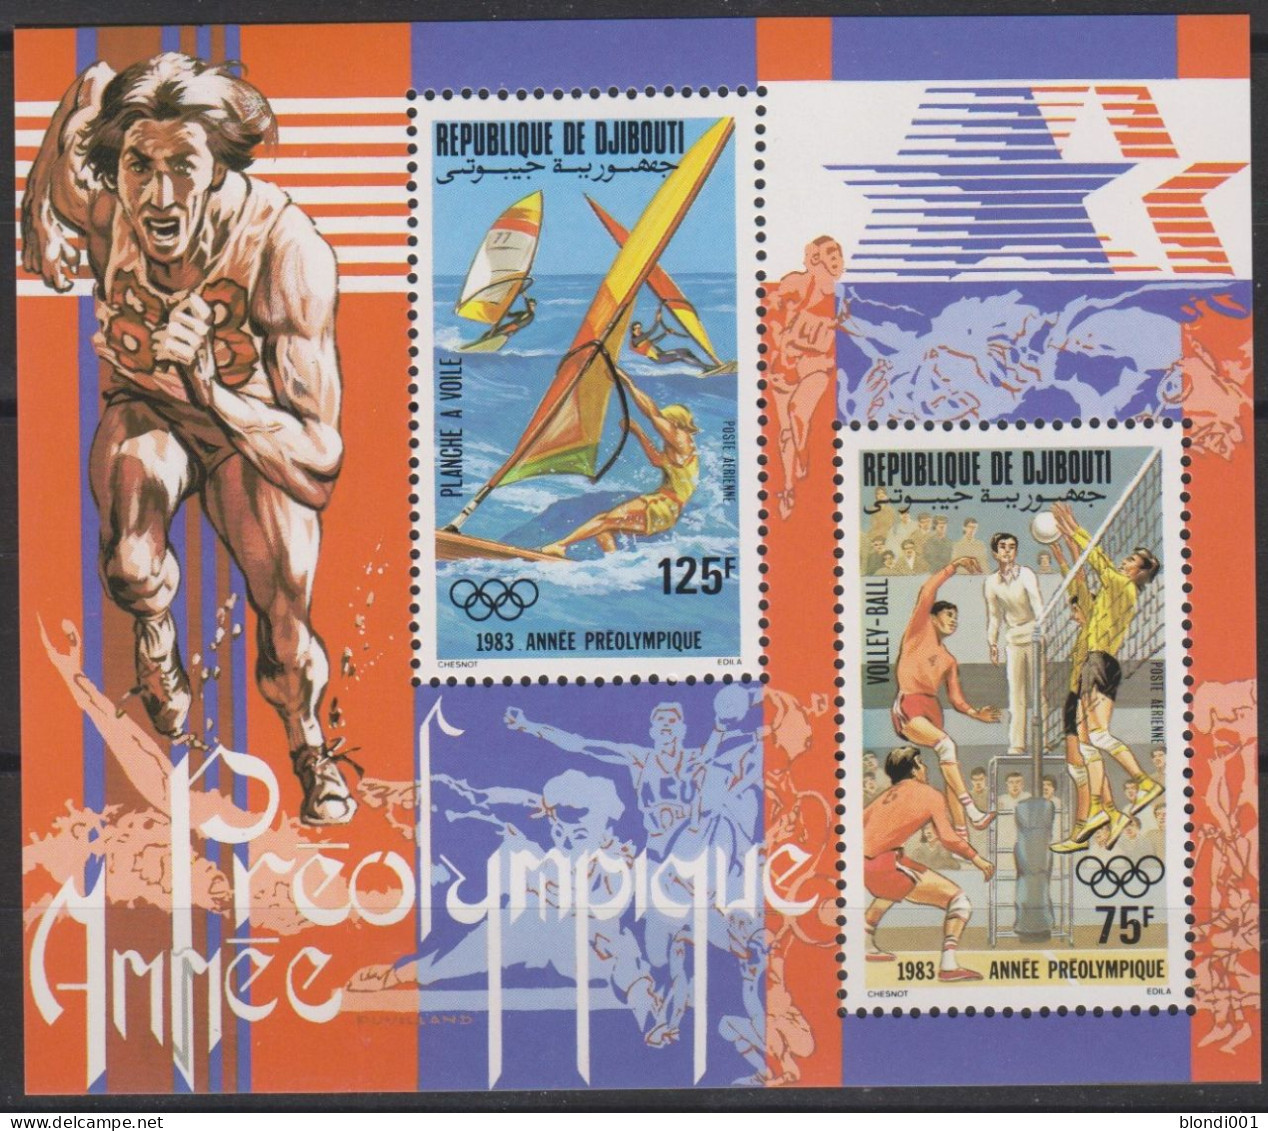 Olympics 1984 - Volleyball - DJIBOUTI - S/S Perf. De Luxe MNH - Estate 1984: Los Angeles